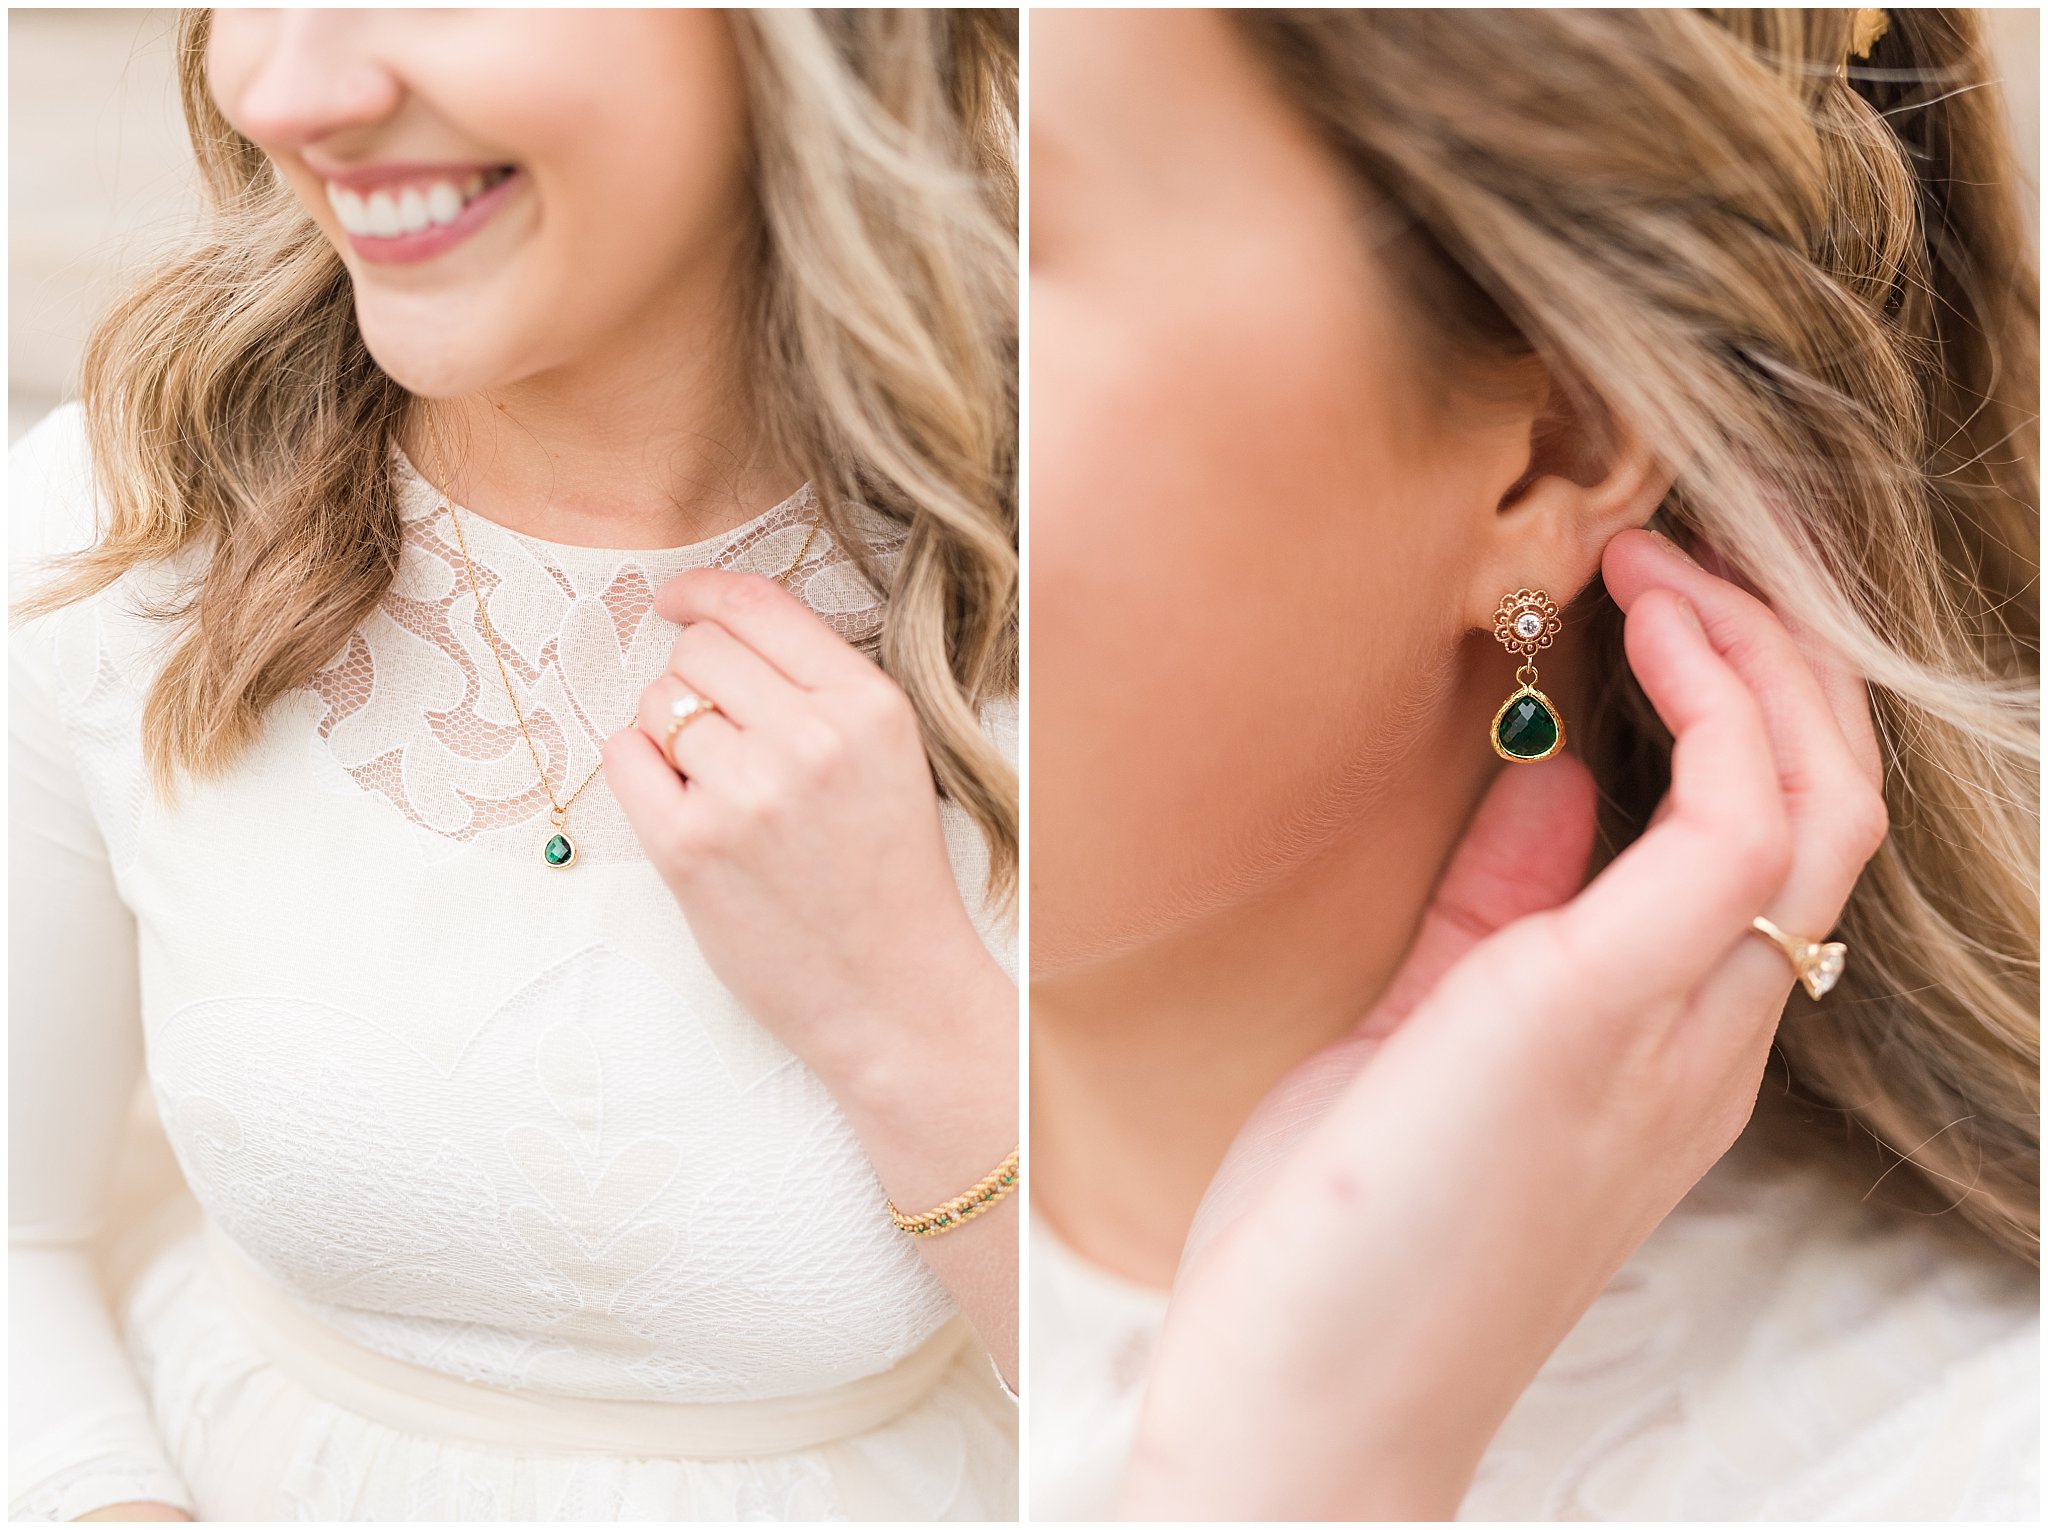 Bride wearing emerald green and gold jewelry for vintage inspired wedding attire | Emerald green, gold wedding colors | Provo City Center Temple Spring Formal Session | Jessie and Dallin Photography